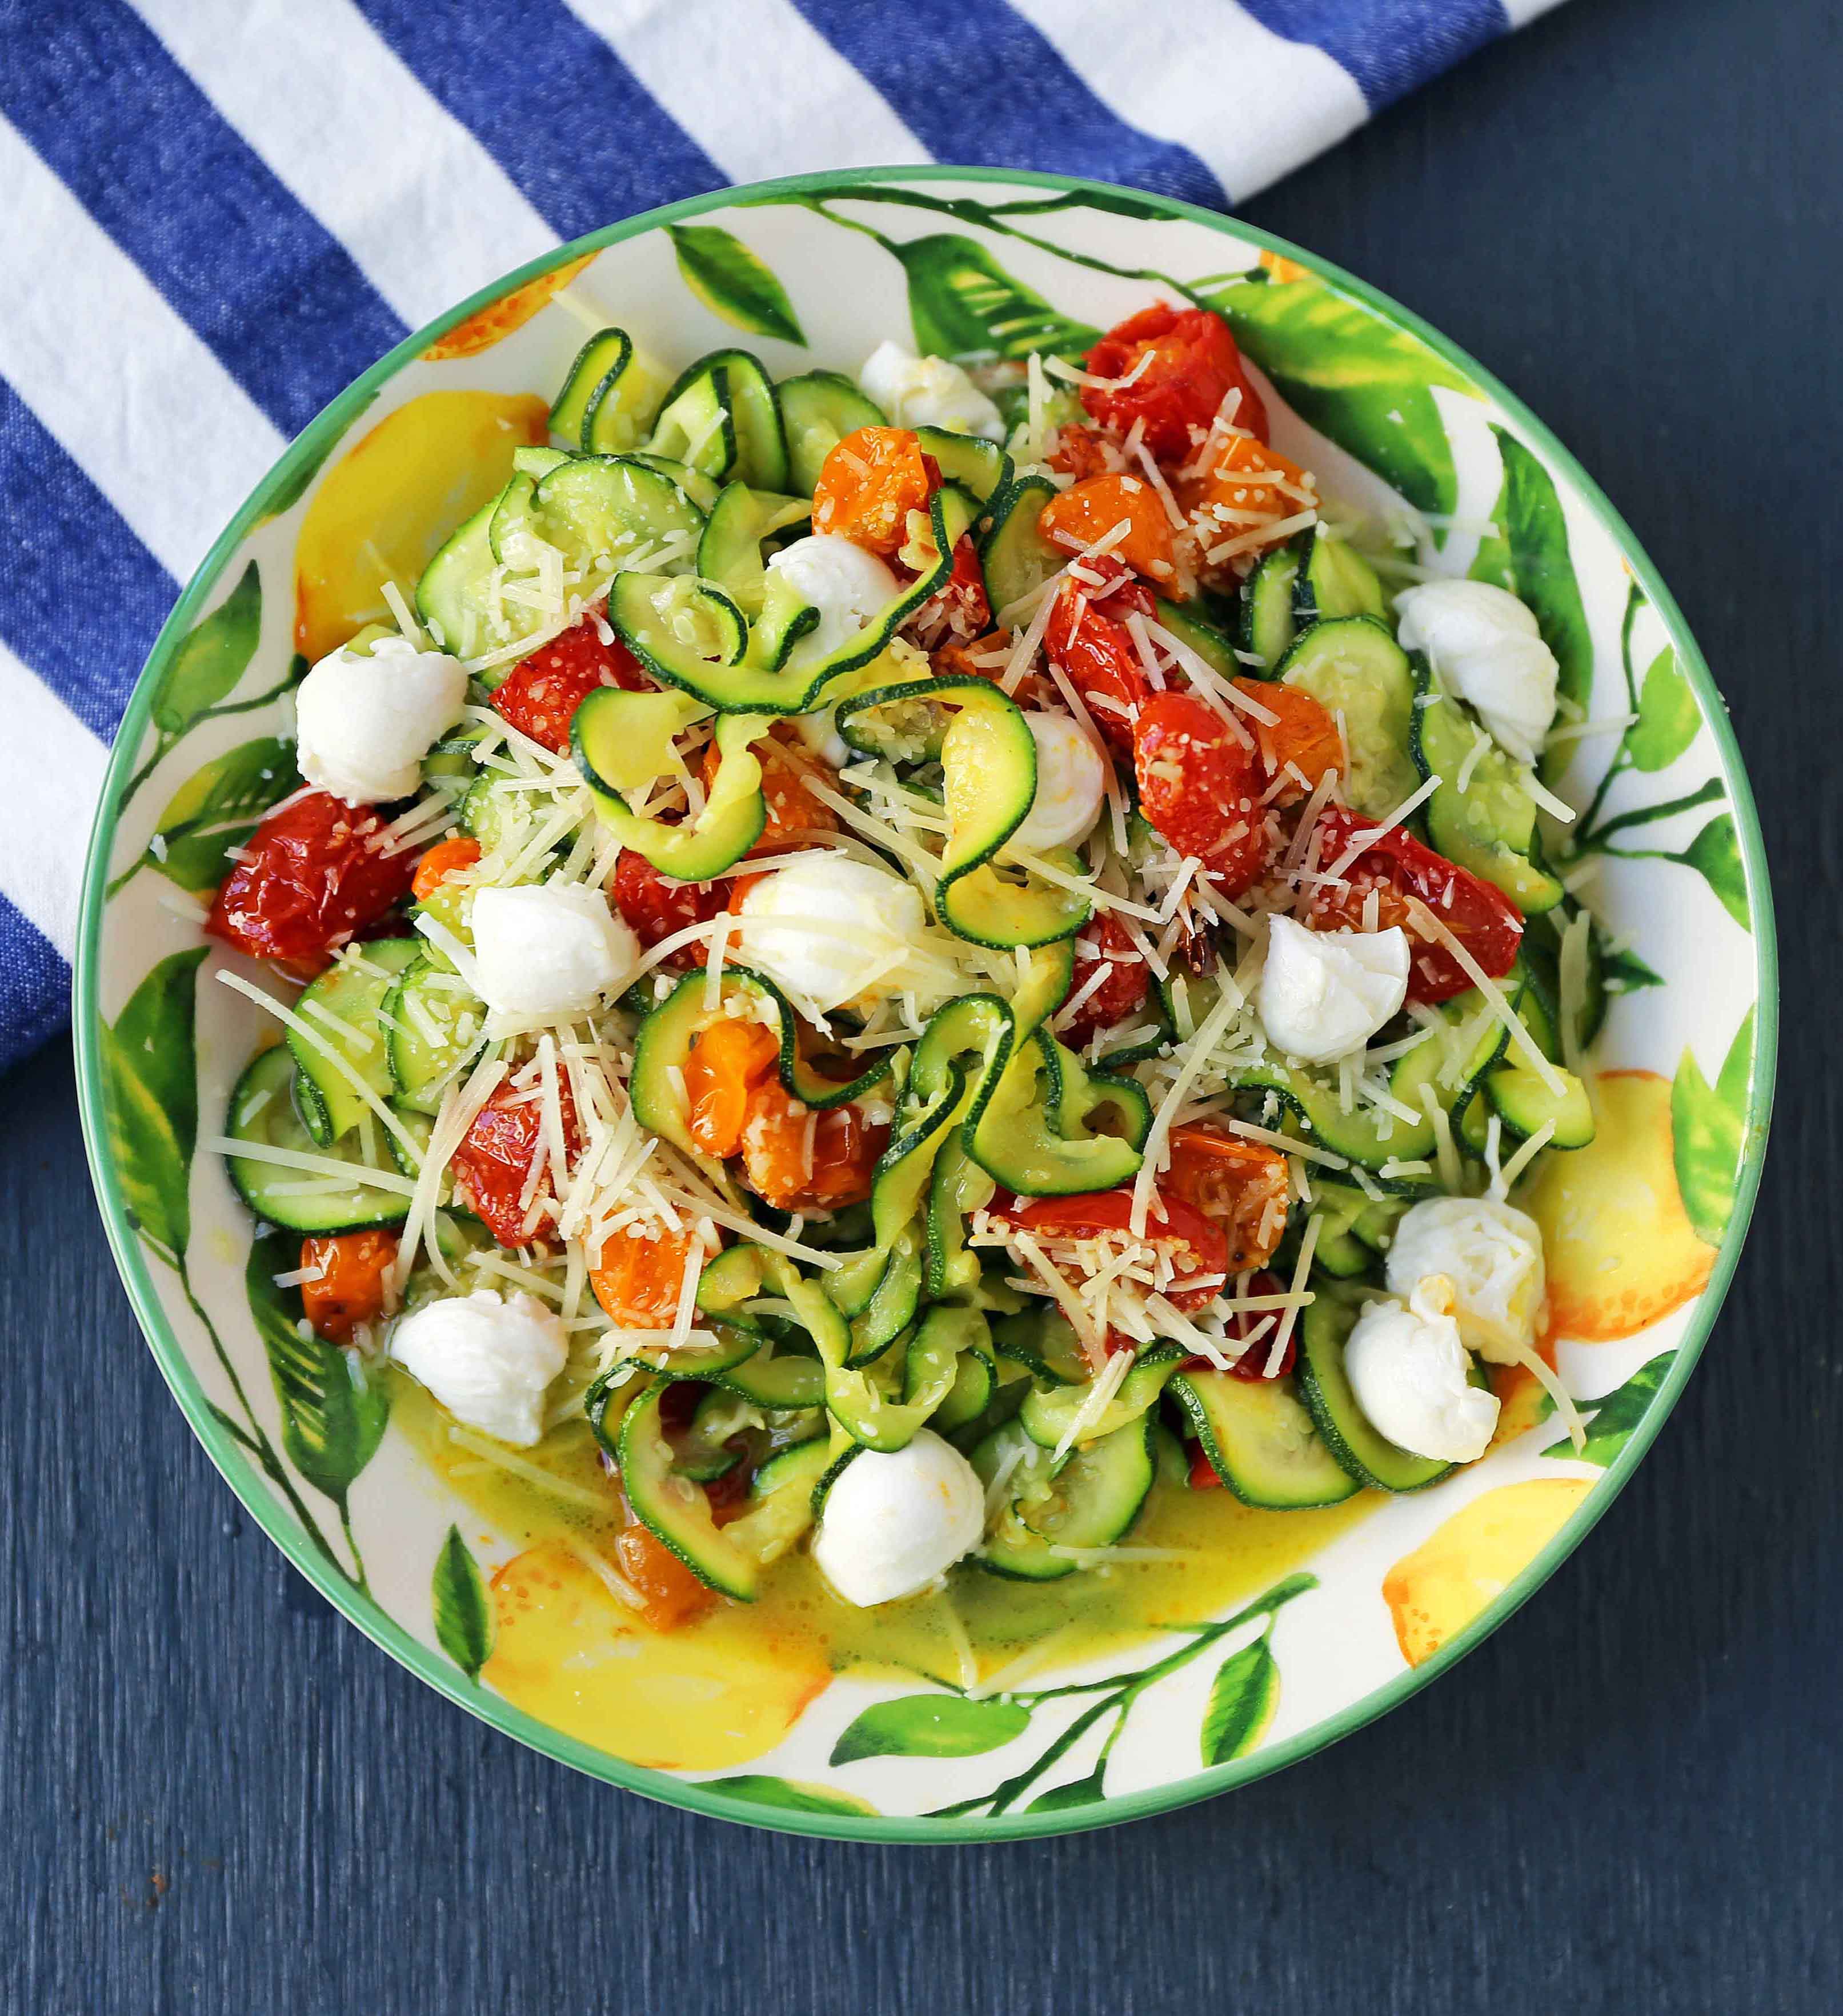 How to Make Zoodles or Zucchini Noodles with a Vegetable